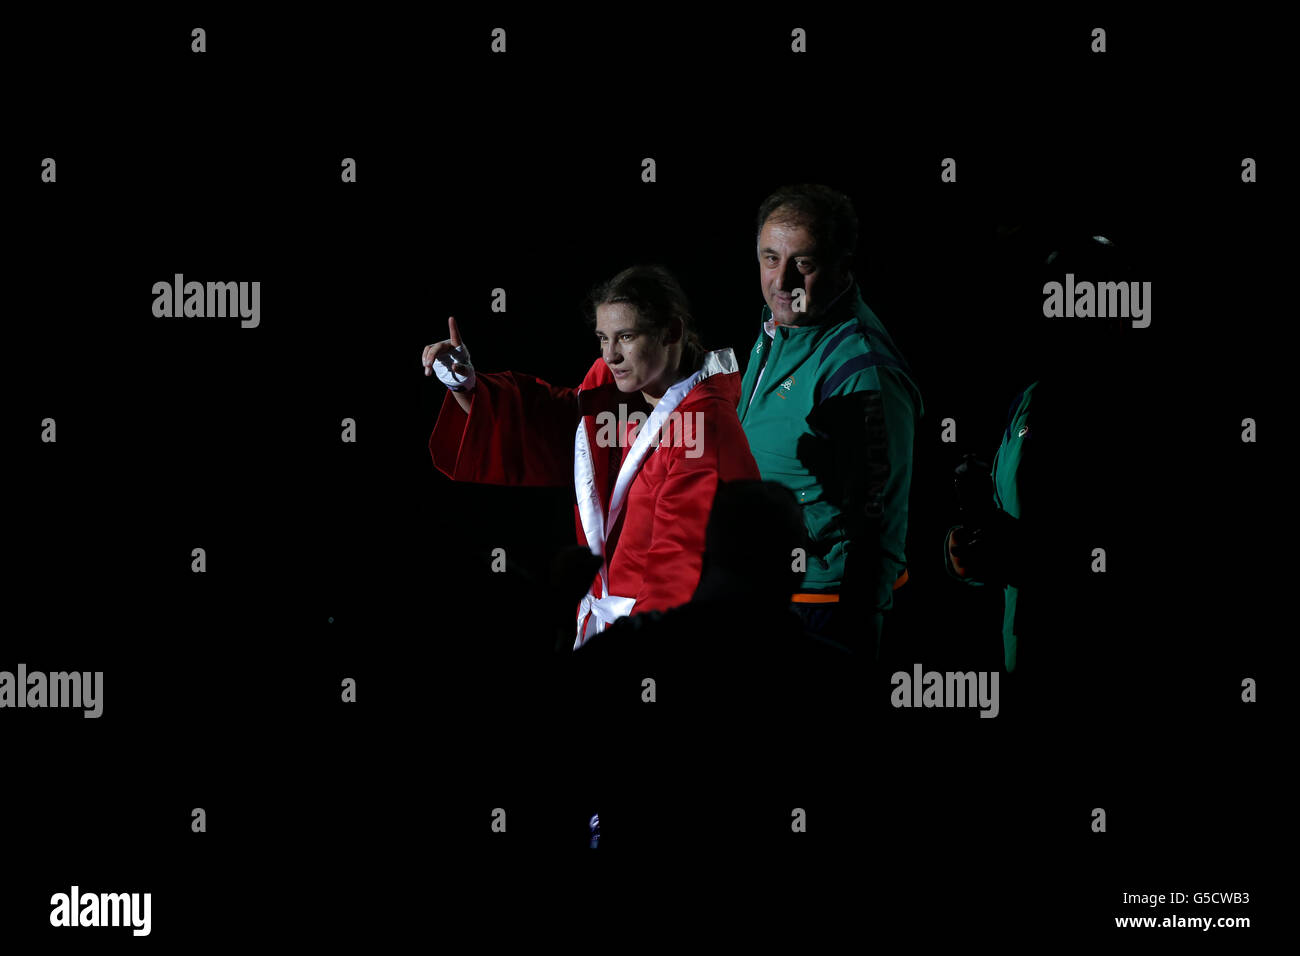 Ireland's Katie Taylor (red) competes against Tajikistan's Mavzuna Chorieva during the Women's Light (57-60kg) boxing at the ExCel centre, London Stock Photo